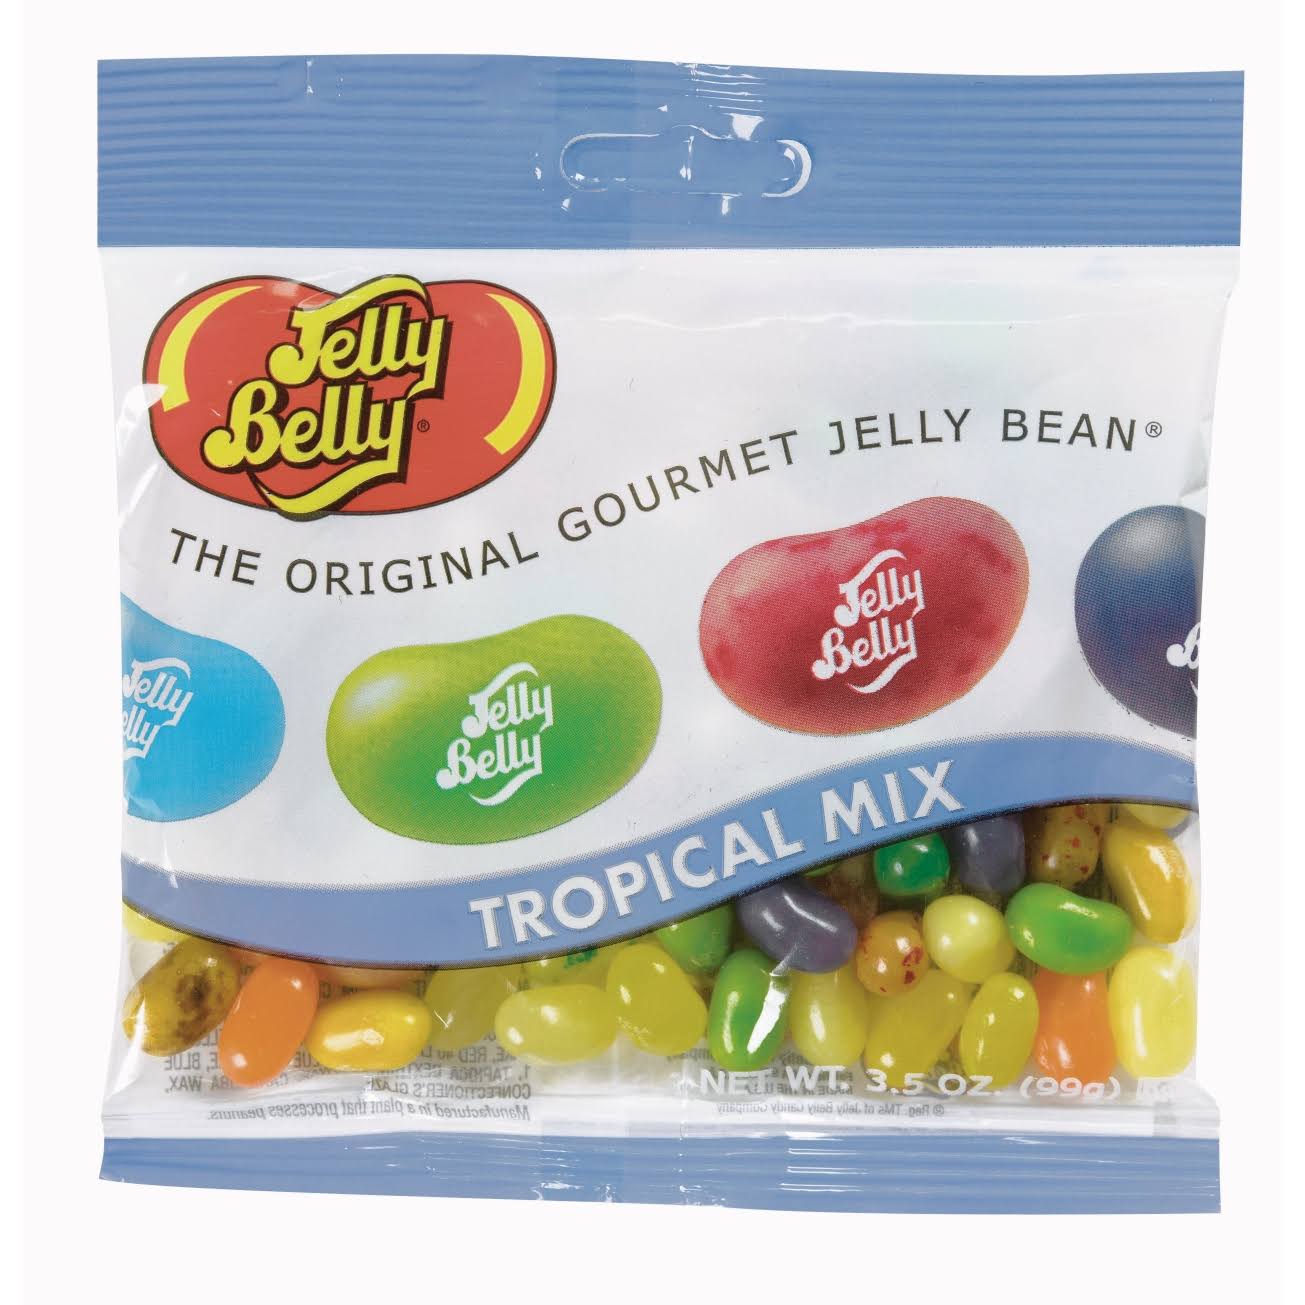 Jelly Belly Tropical Mix Candy - 3.5oz